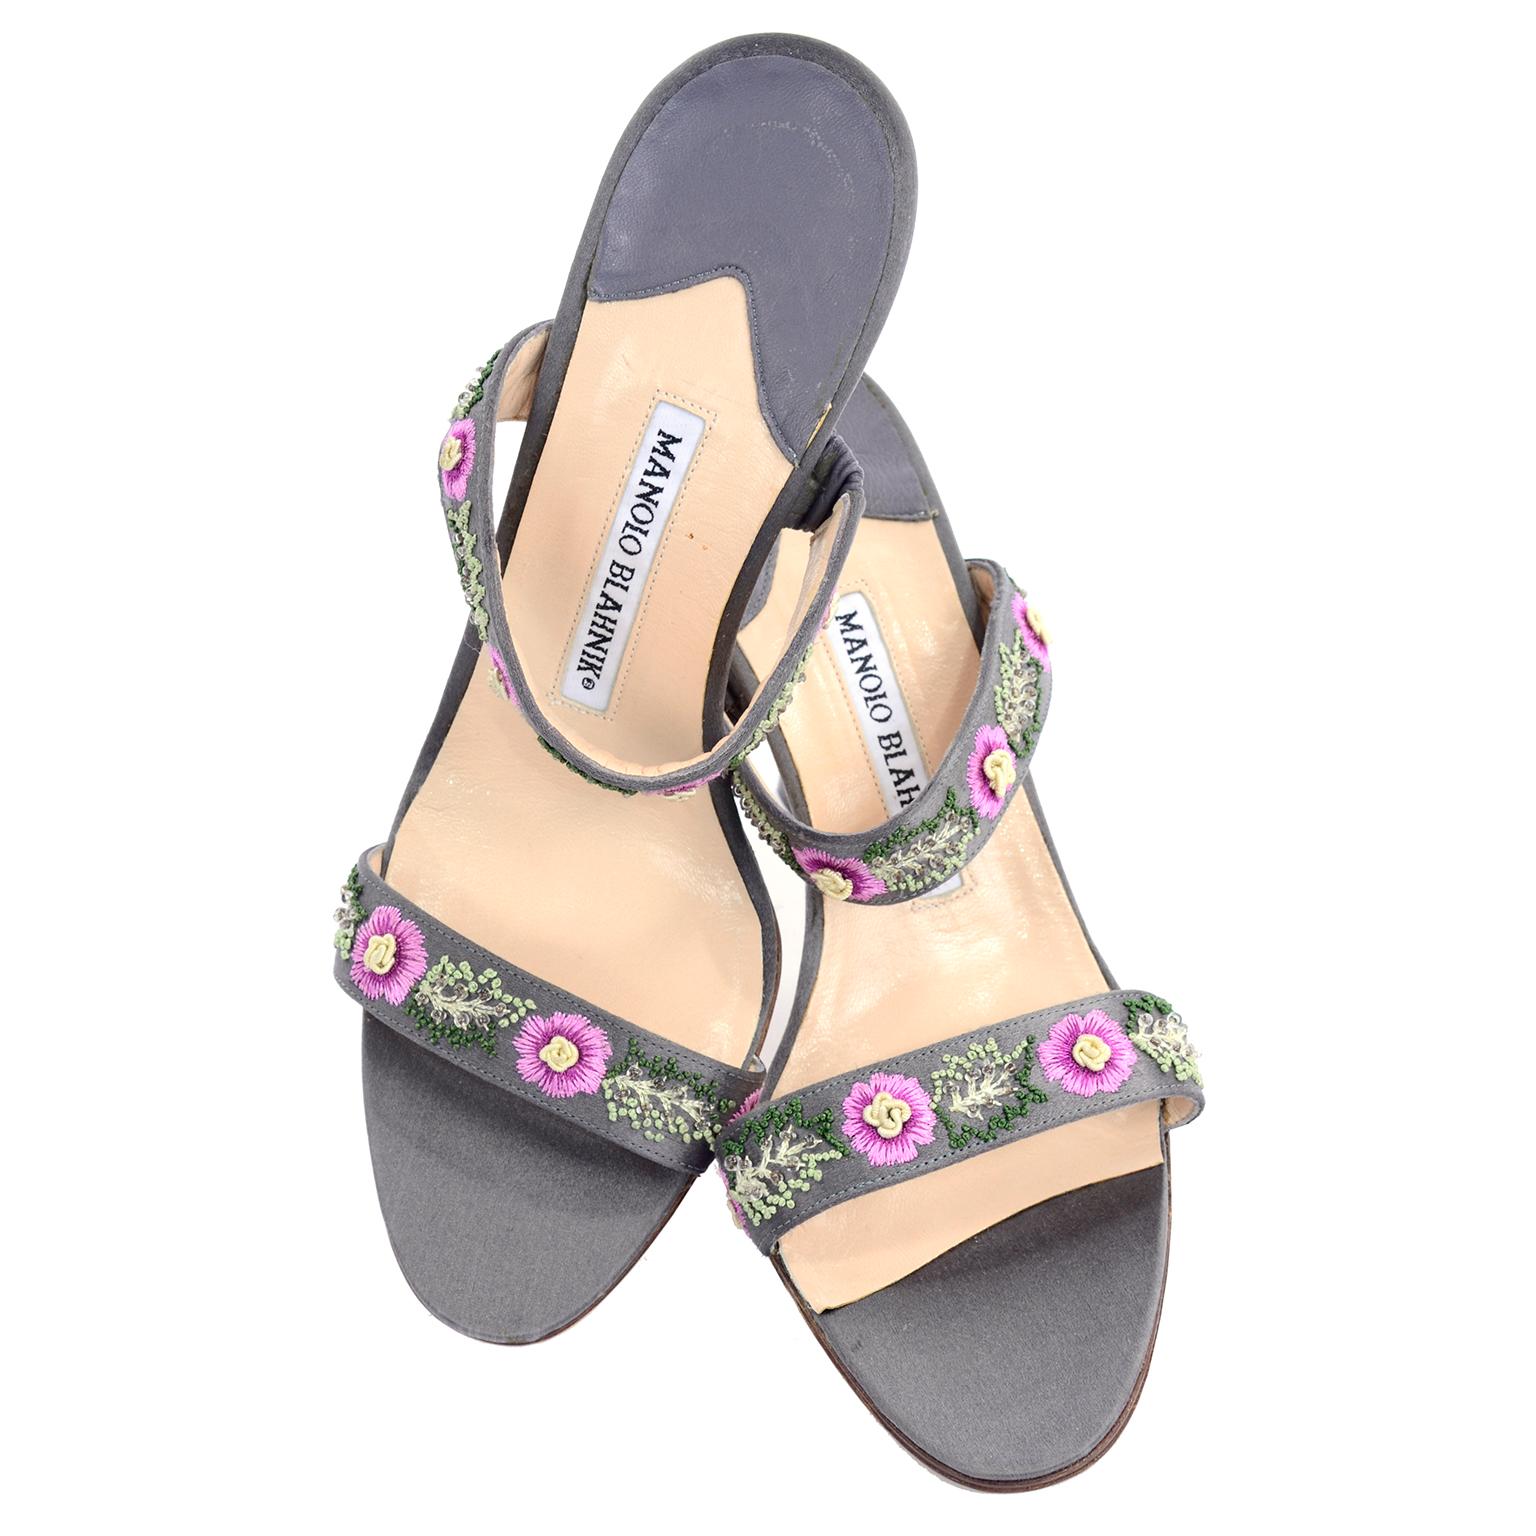 These pretty gray Manolo Blahnik shoes have beautiful embroidered pink flowers with cream centers and embroidered green leaves that are embellished with beading.  These open toe slide sandals have lovely heels and were only worn once.  Wear them in